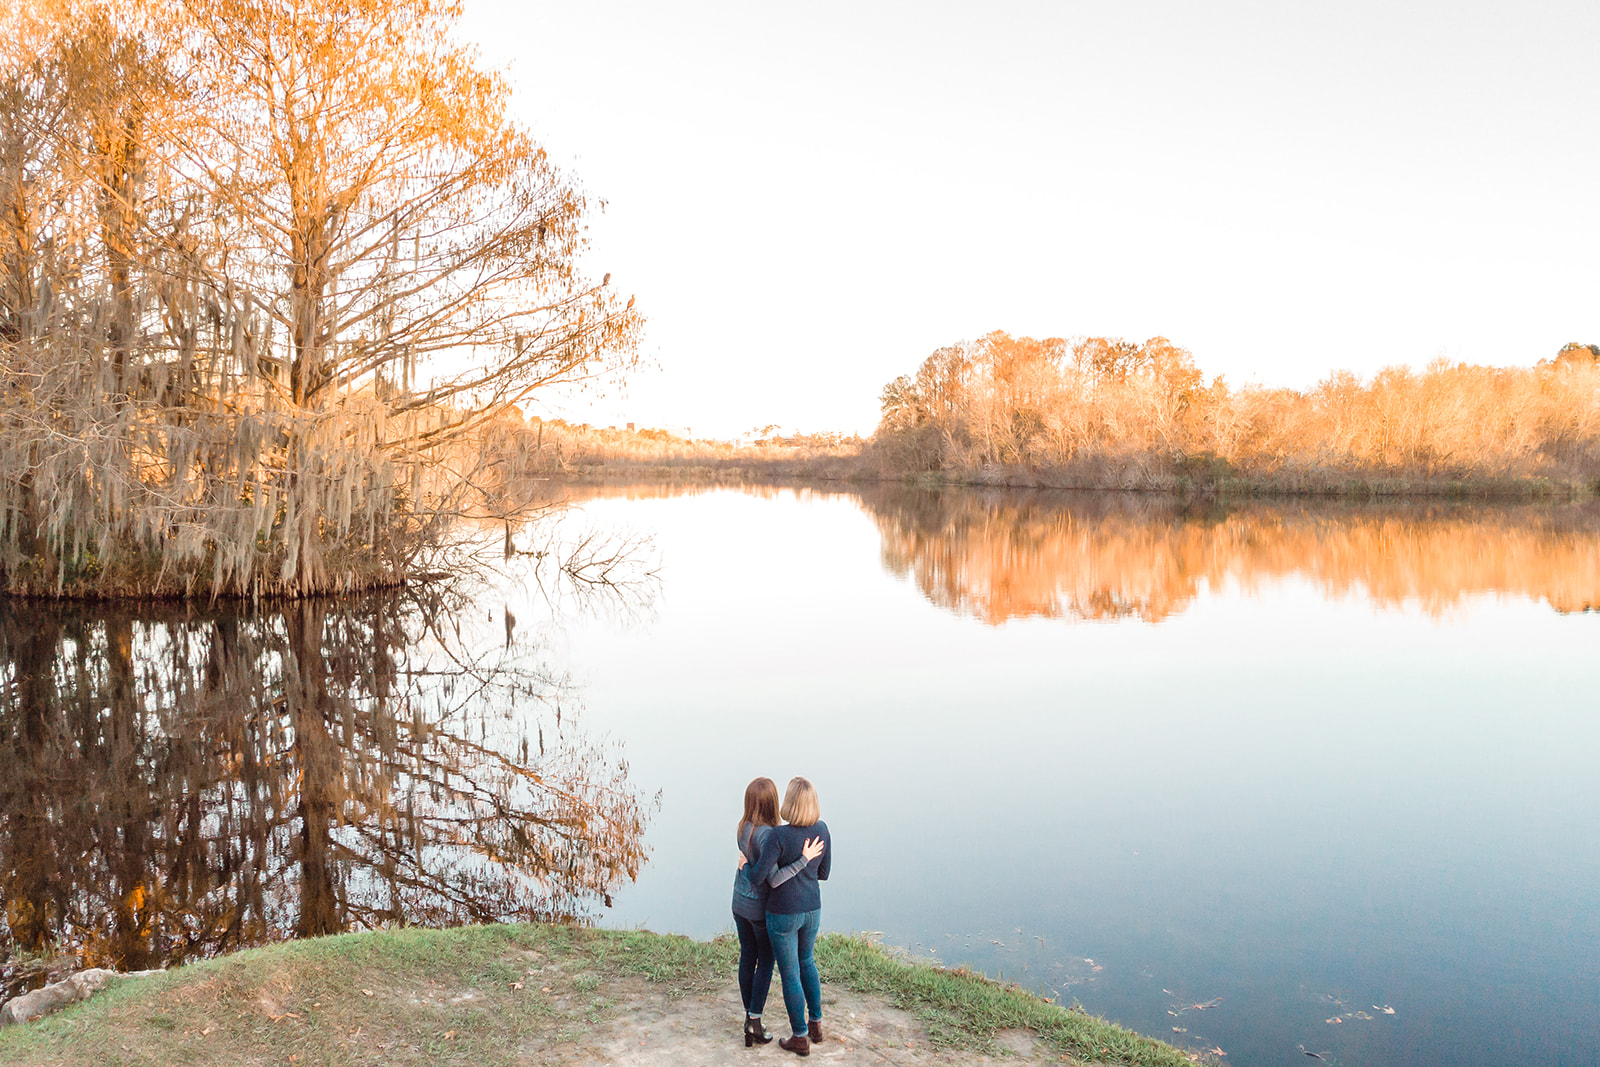 Two brides stand side by side, embracing by the edge of a serene lake, surrounded by the beauty of nature.